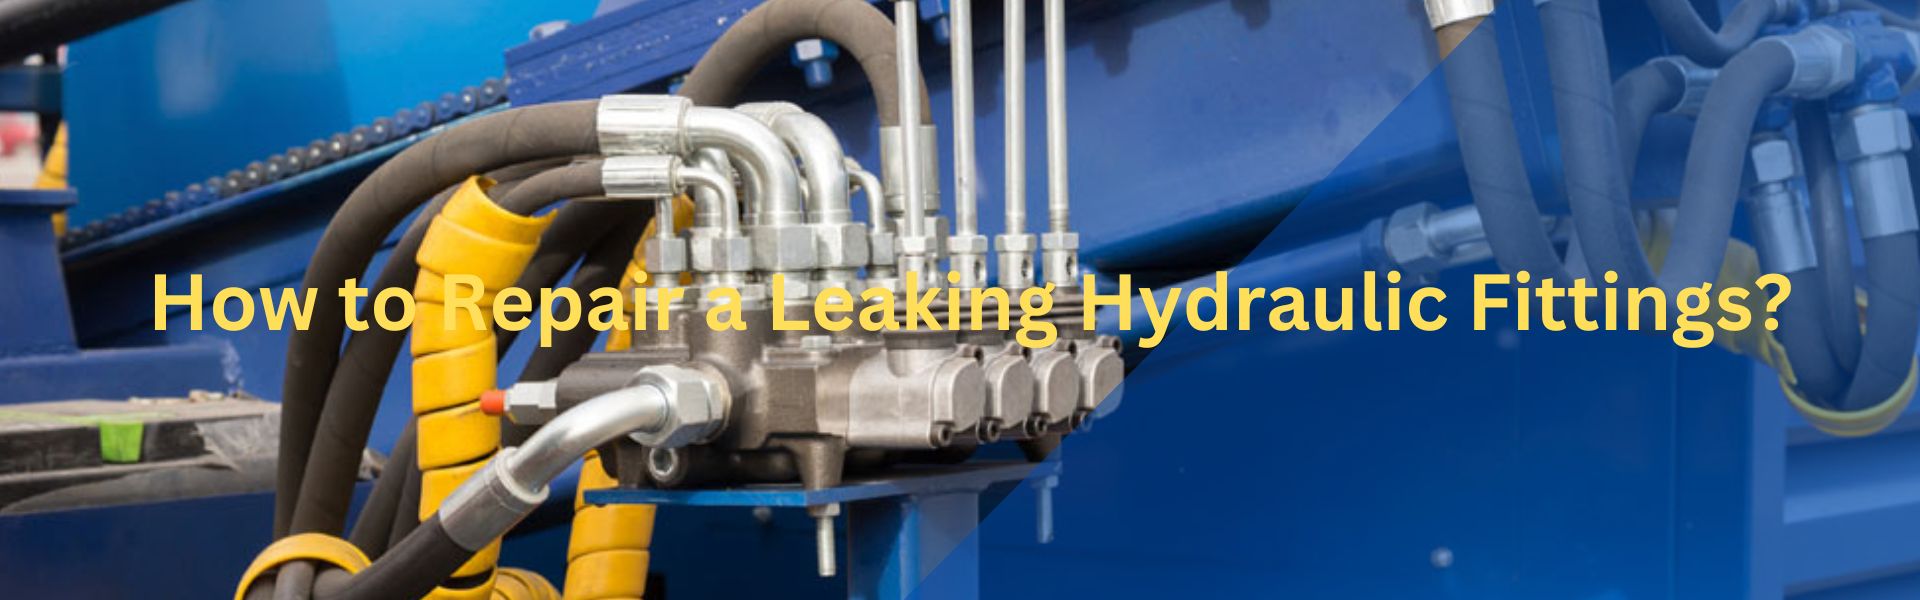 How to repaire a leaking hydraulic fitting